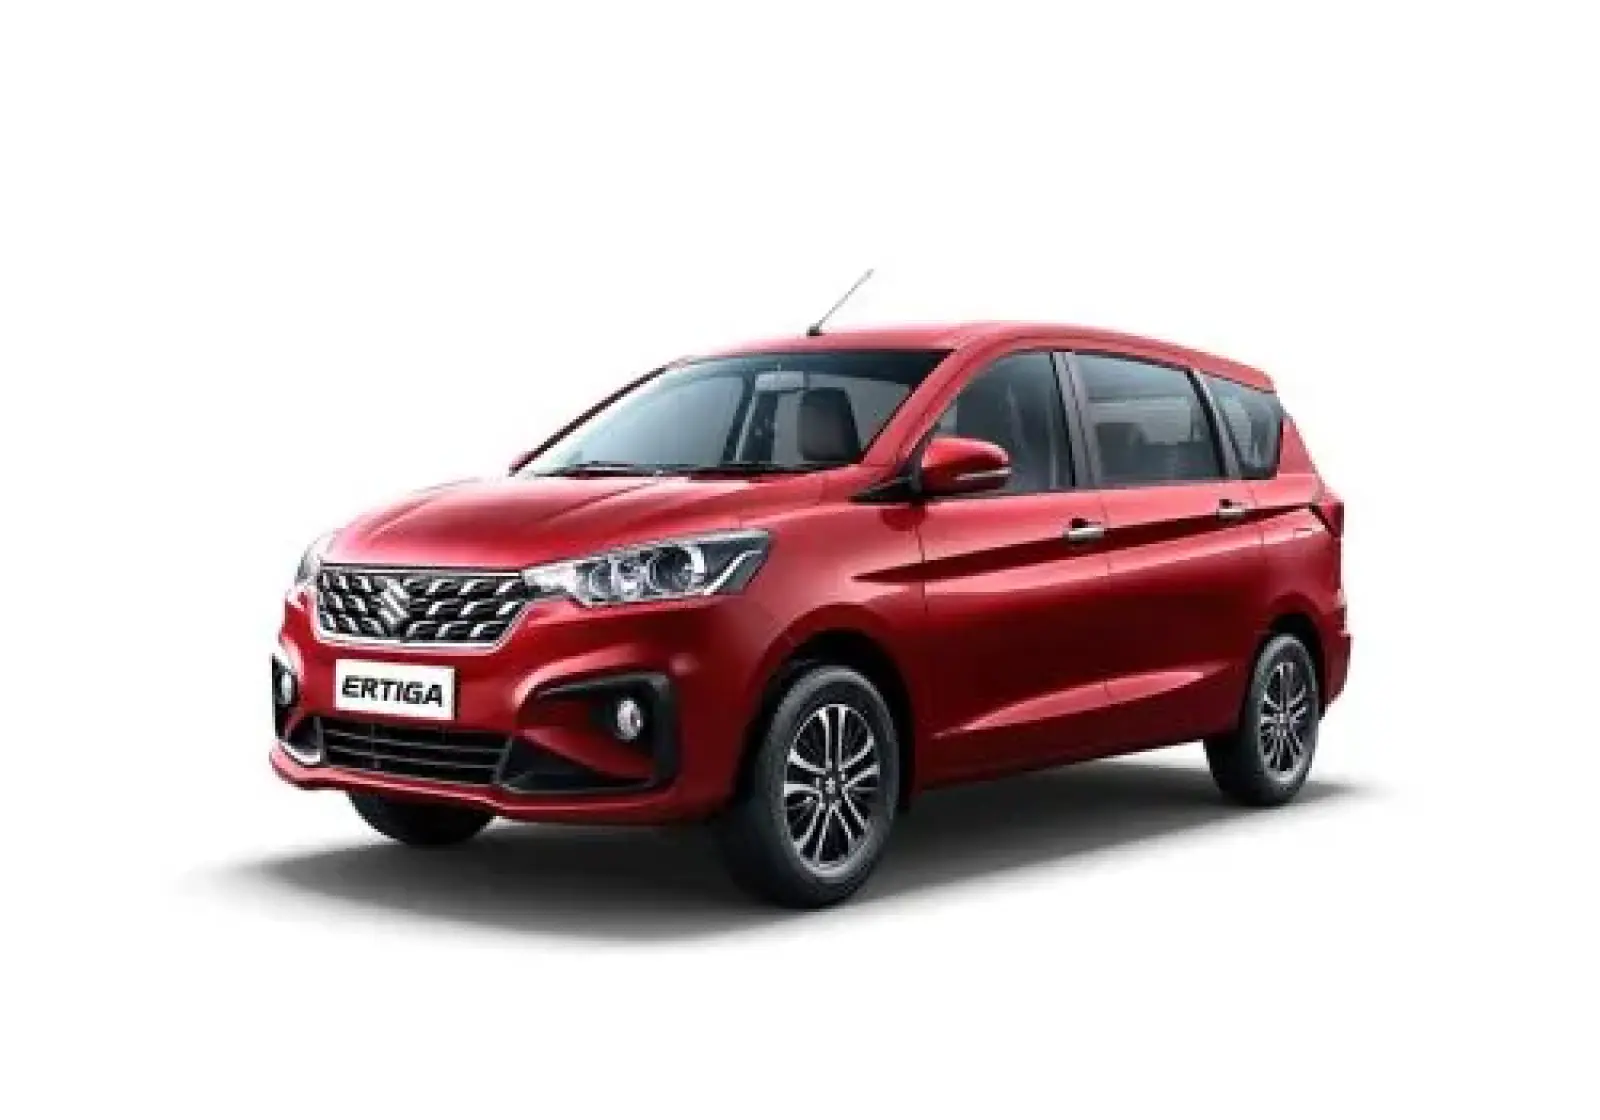 Bring home LXI (O) variant of Maruti's 7 seater Ertiga after down payment of Rs 2 lakh, know how much EMI you will have to pay